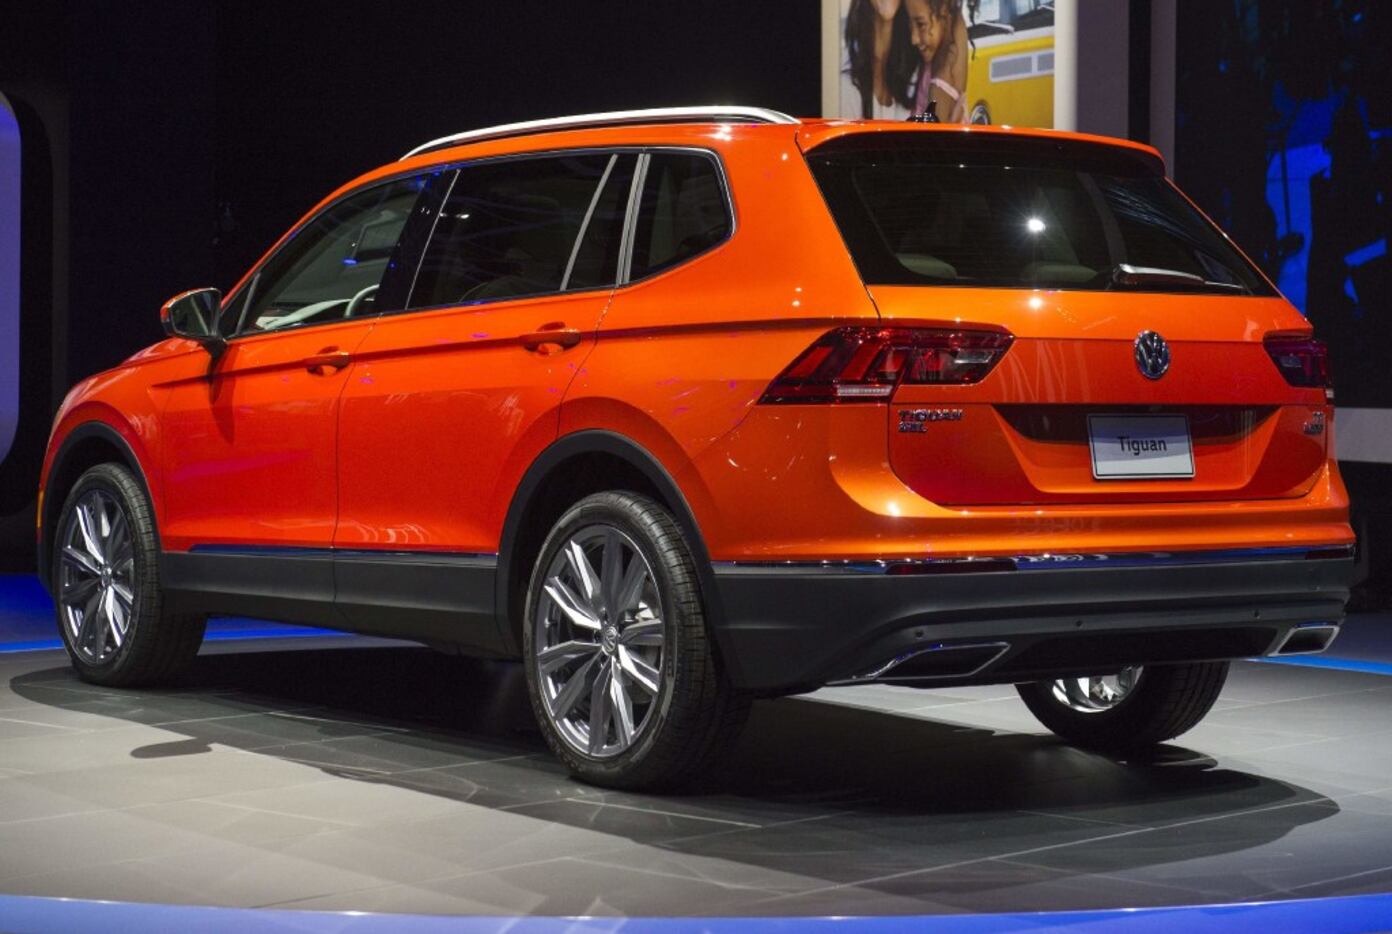 The 2018 Volkswagen Tiguan SUV is unveiled during the 2017 North American International Auto...